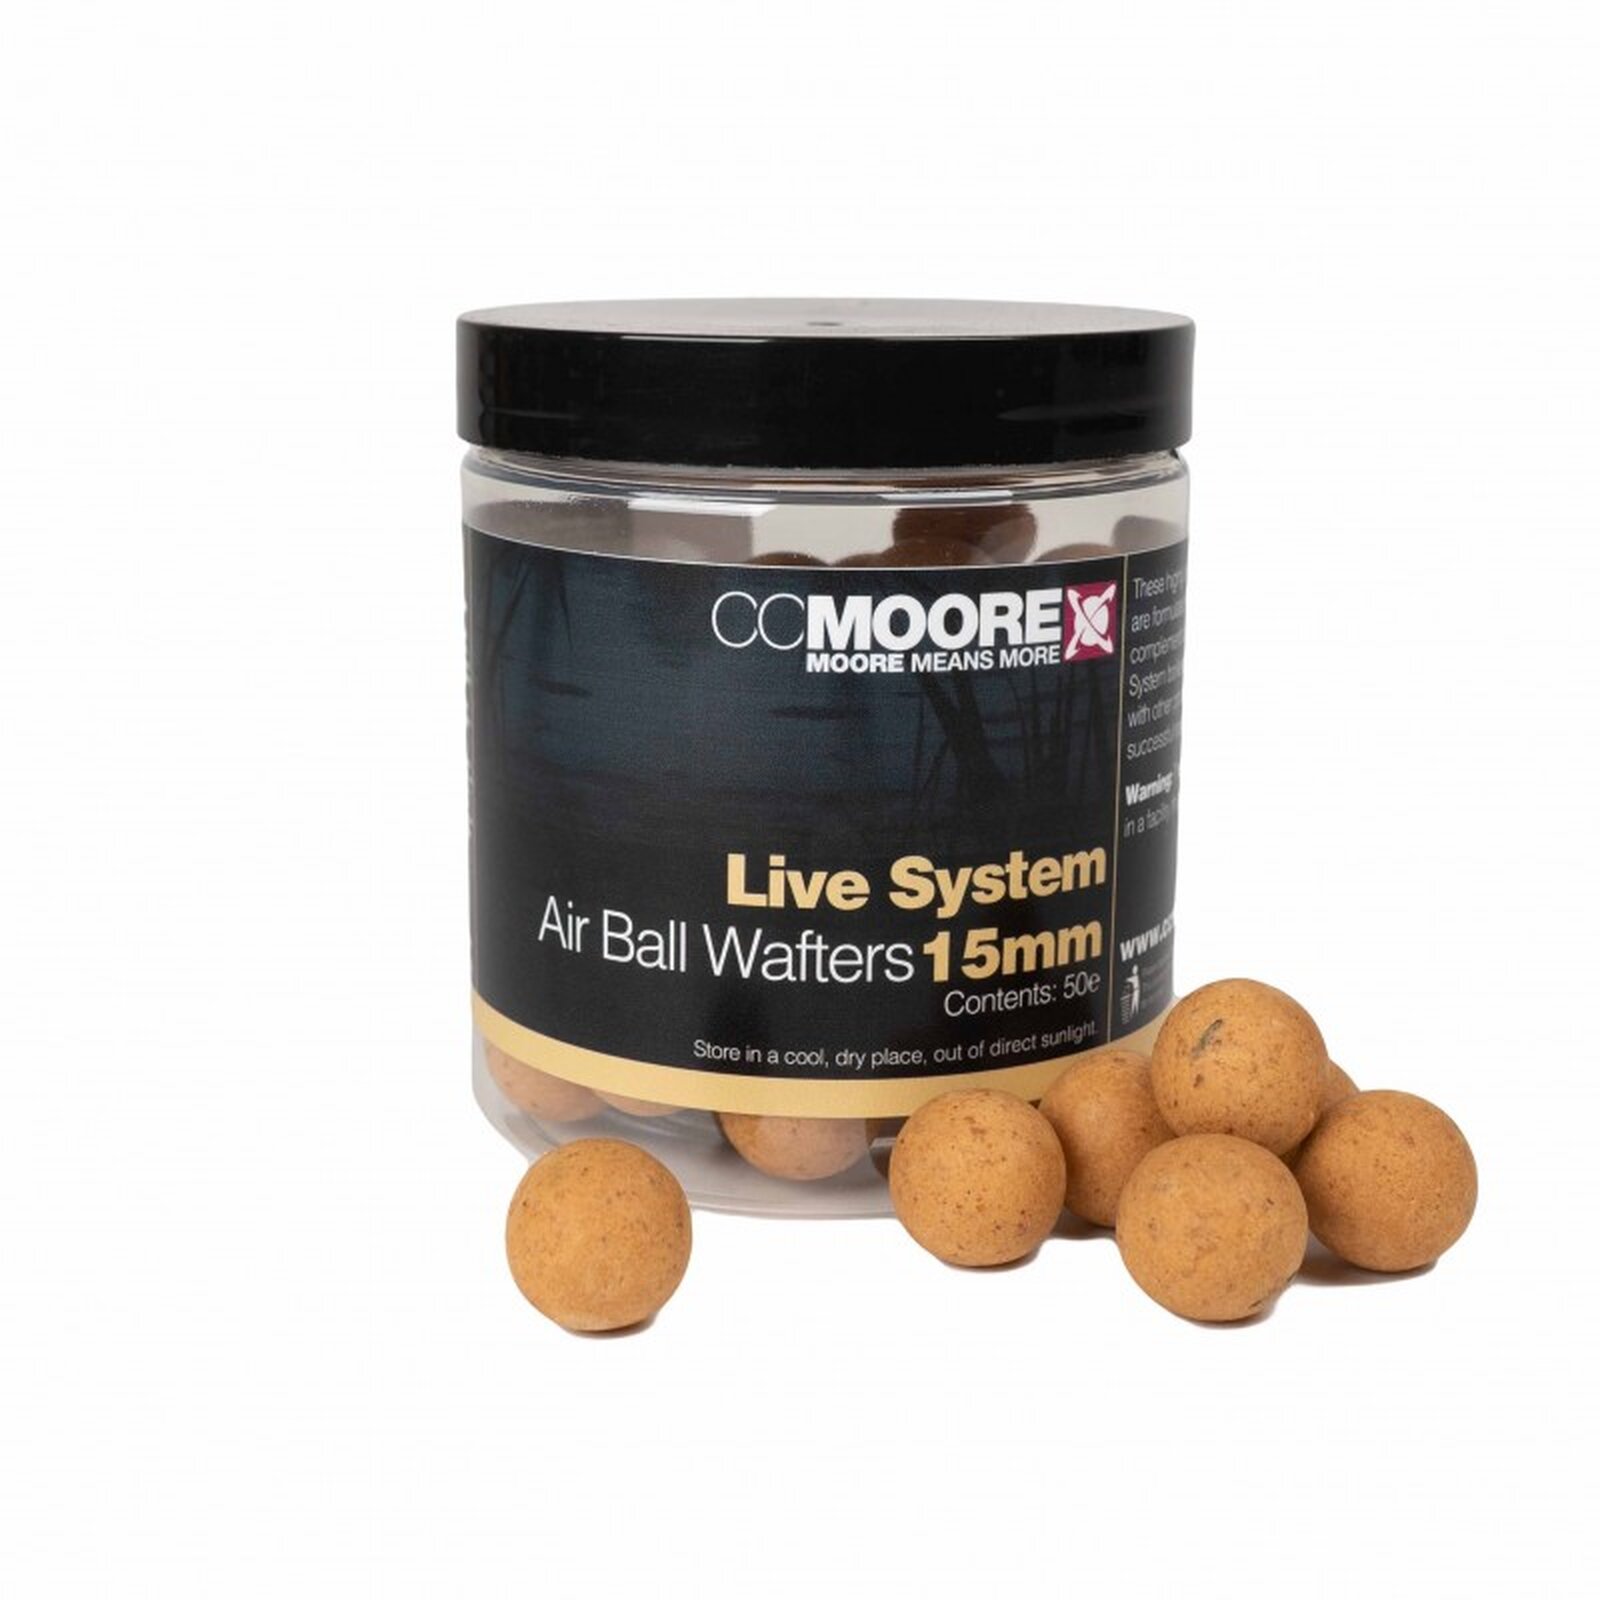 CC MOORE Live System Air Ball Wafters 12mm